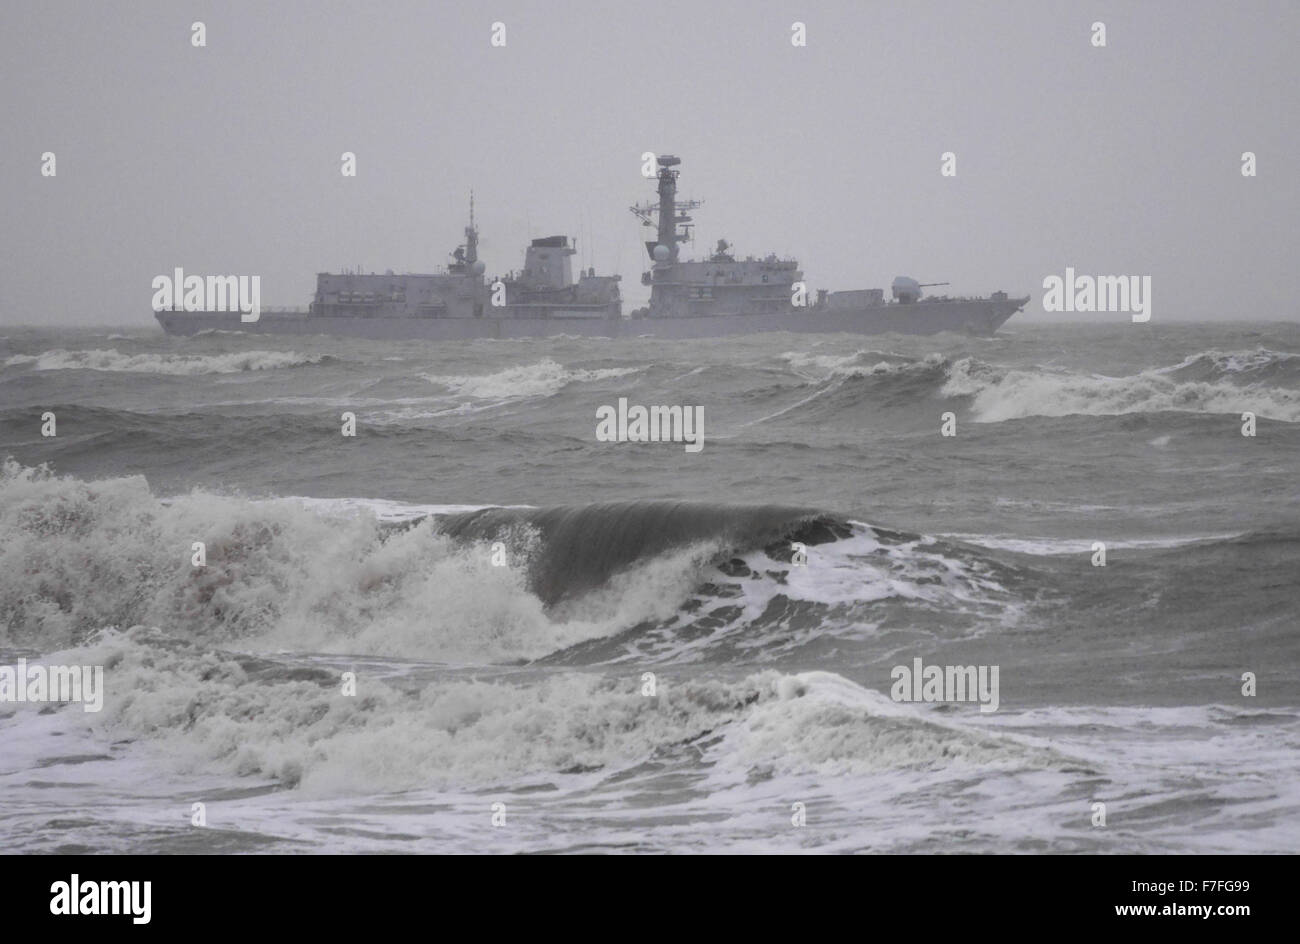 UK Weather River Mersey 30.11.15.HMS Sutherland of the British Royal Navy. Sails out of Liverpool during Storm Clodagh Credit:  ALAN EDWARDS/Alamy Live News Stock Photo